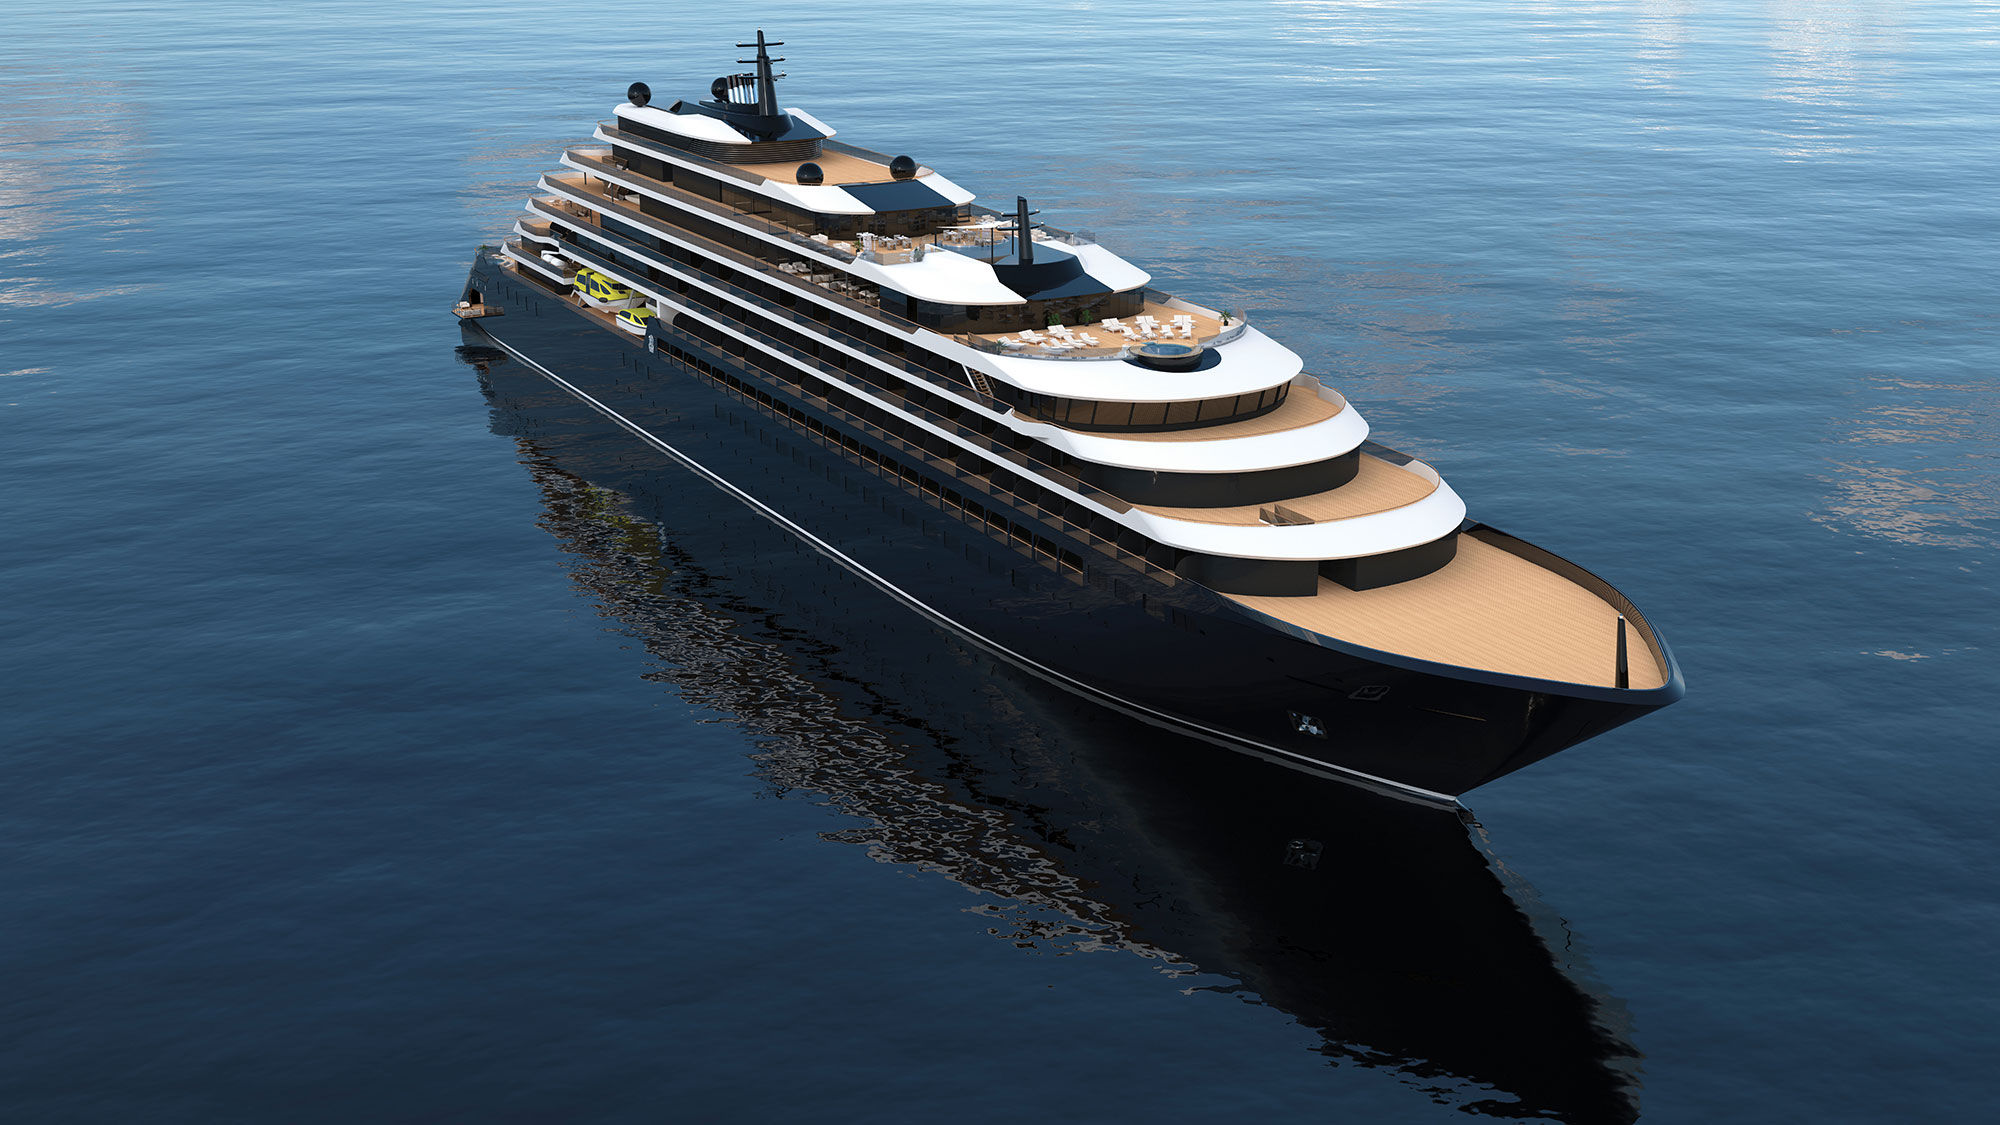 T1115RCYCREND_C_HR [Credit: Ritz Carlton Yacht Collection]